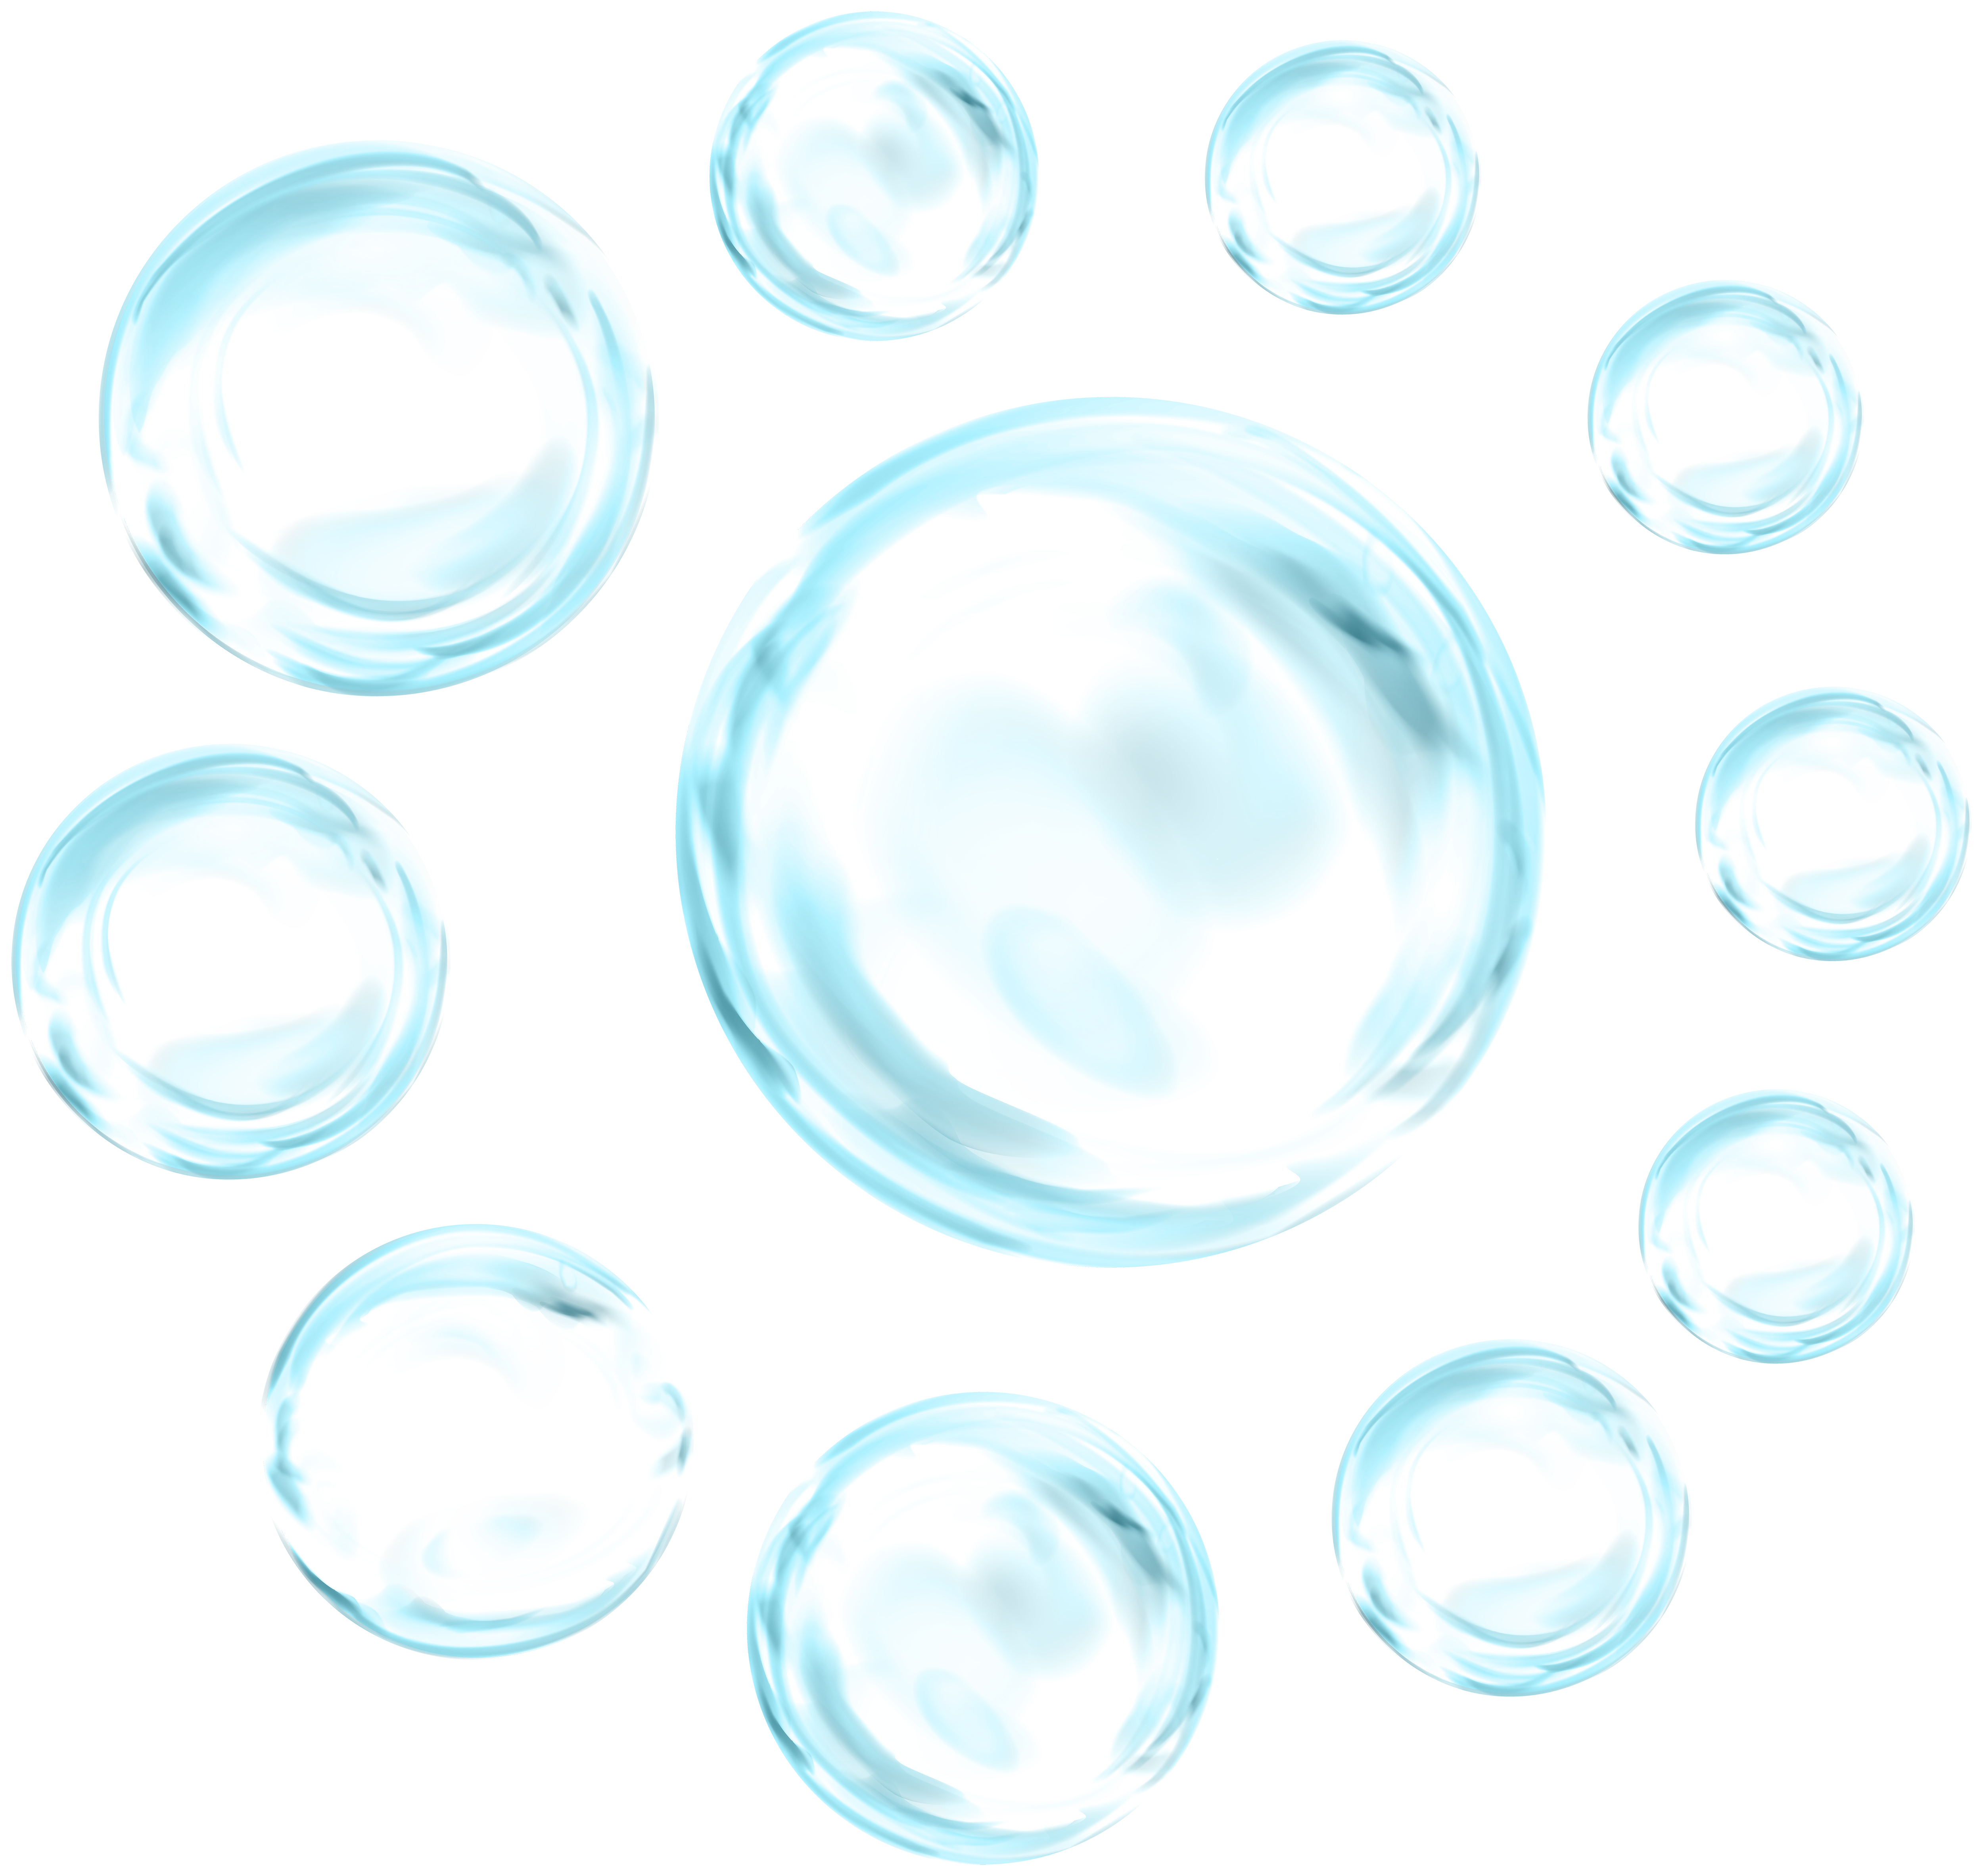 Water Bubbles Transparent Vector PNG Images, Realistic Water Bubbles In  Transparent Background, Water Bubbles, Bubbles Clipart, Soap Bubbles PNG  Image For Free Download